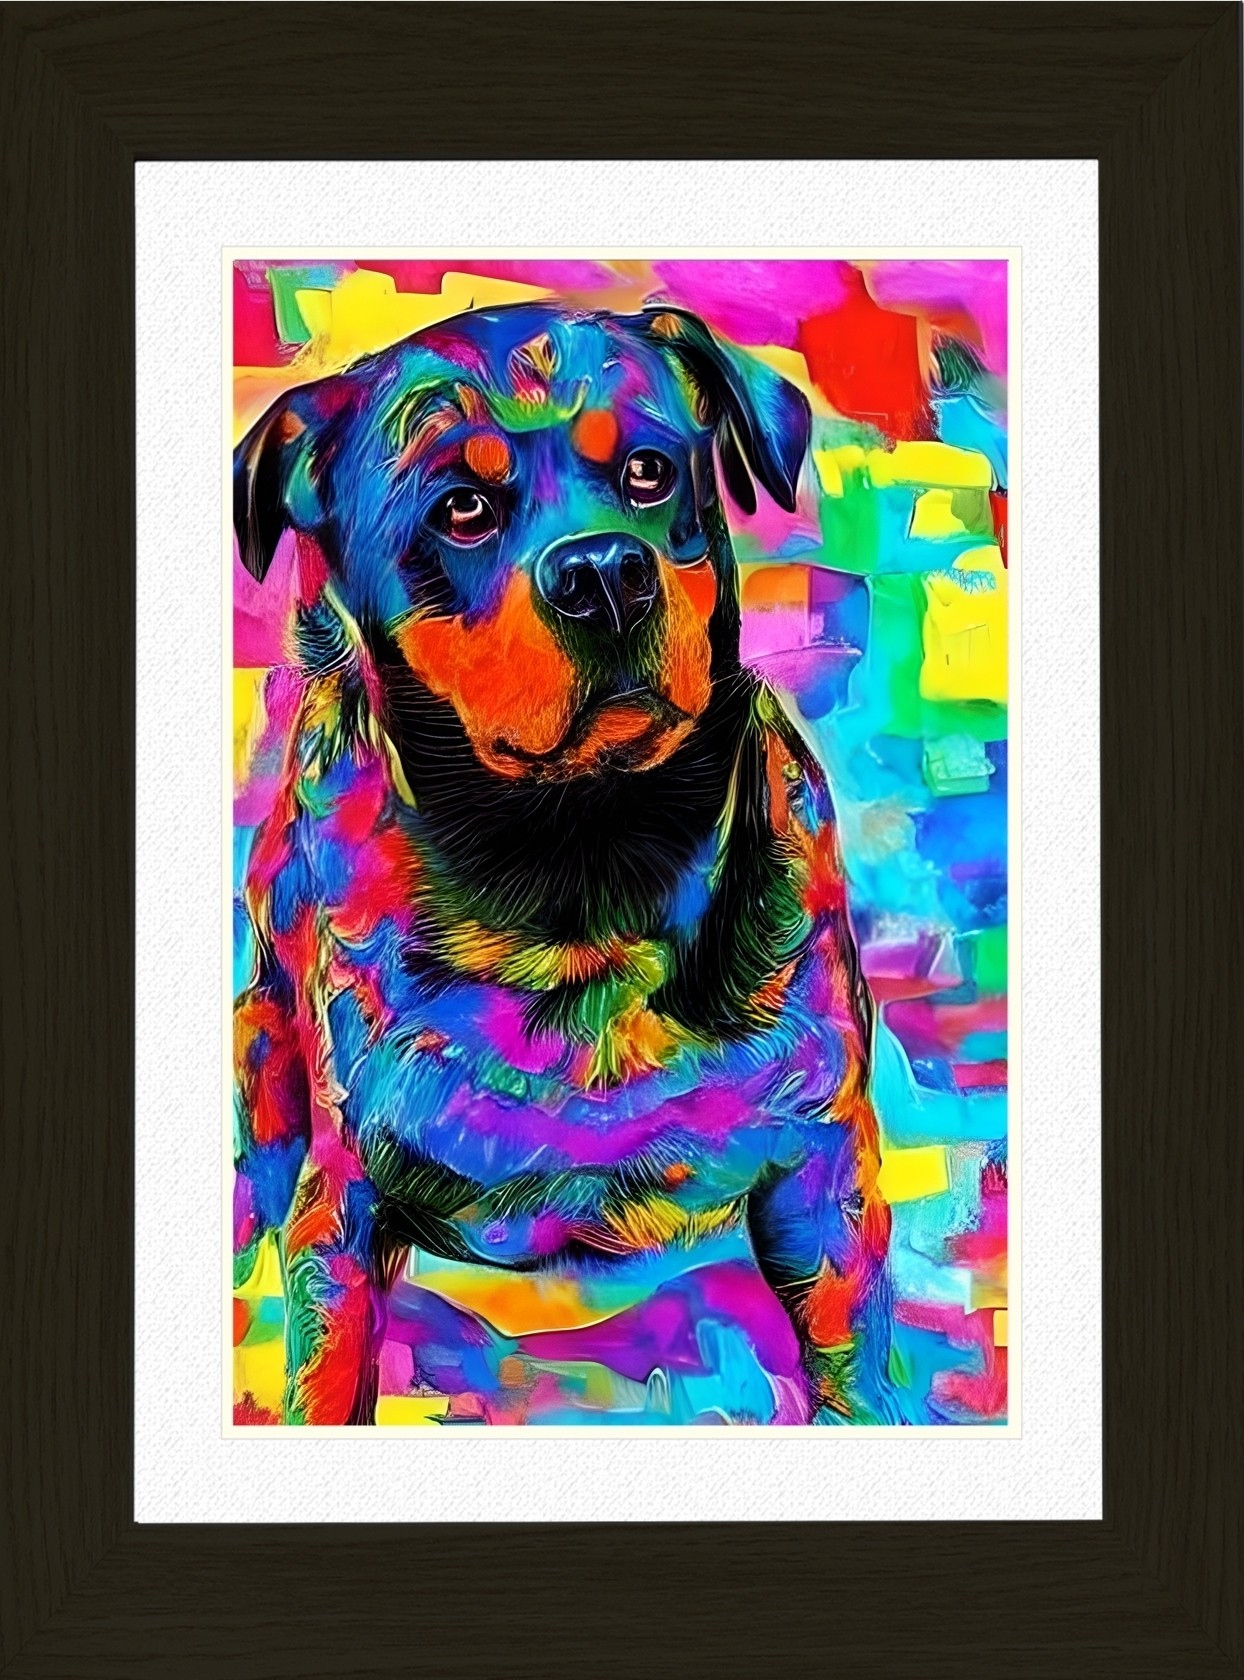 Rottweiler Dog Picture Framed Colourful Abstract Art (A3 Black Frame)